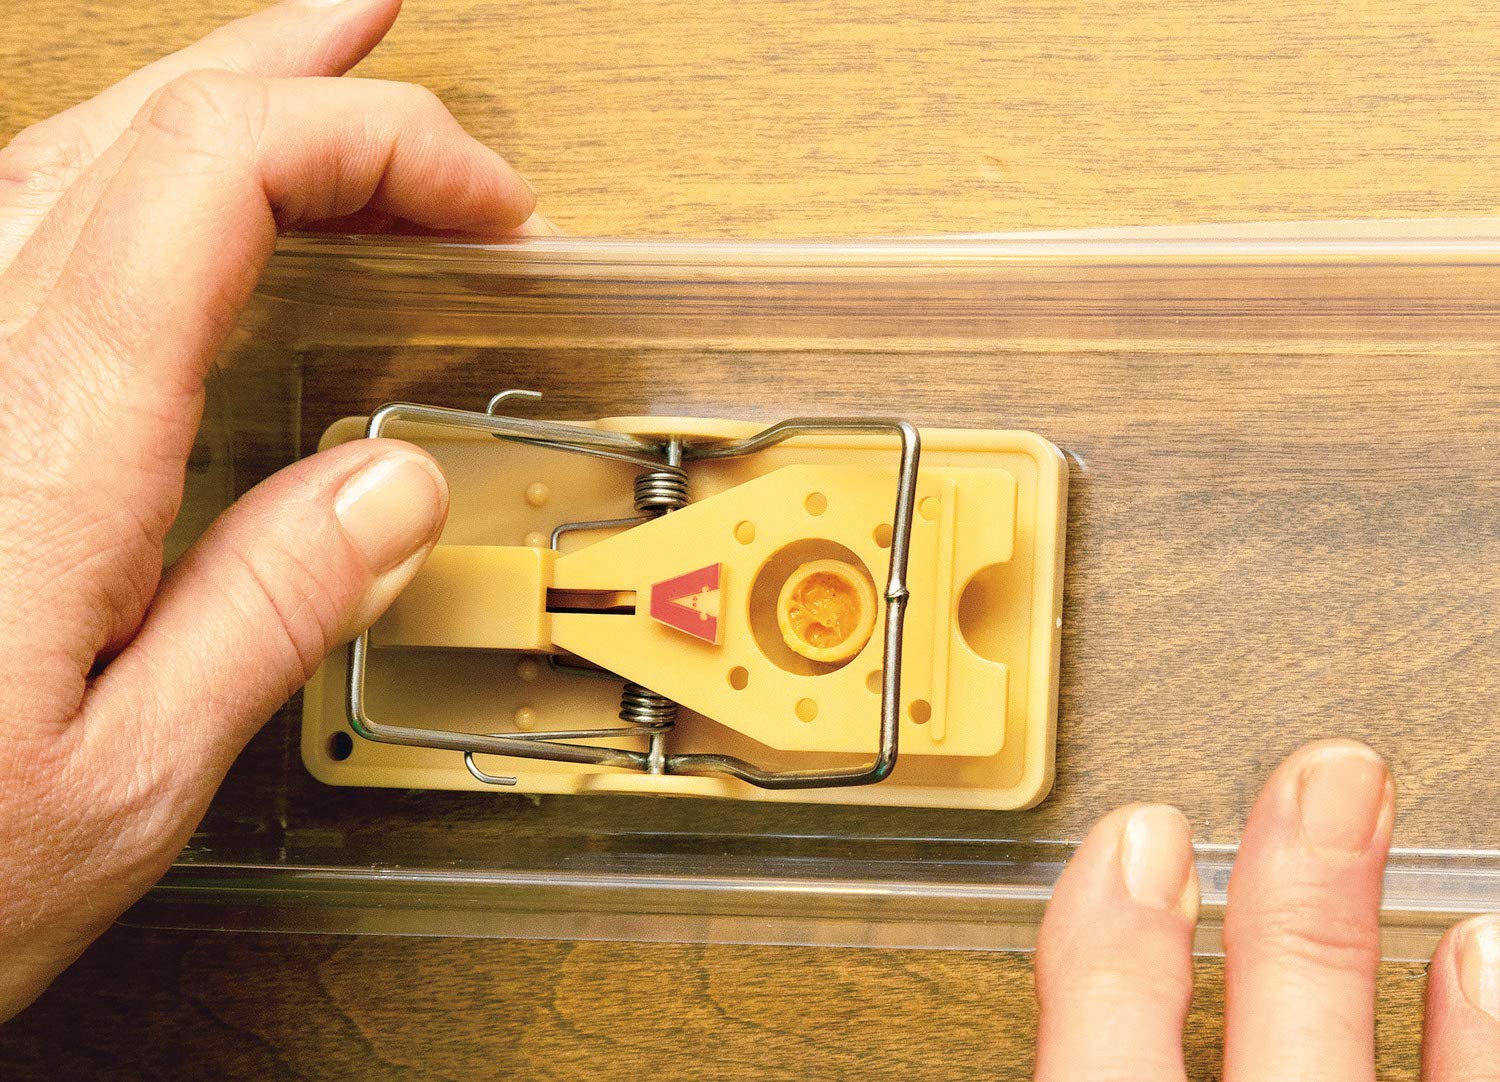 Doombox Better Mouse Trap - Safe for Kids and Pets